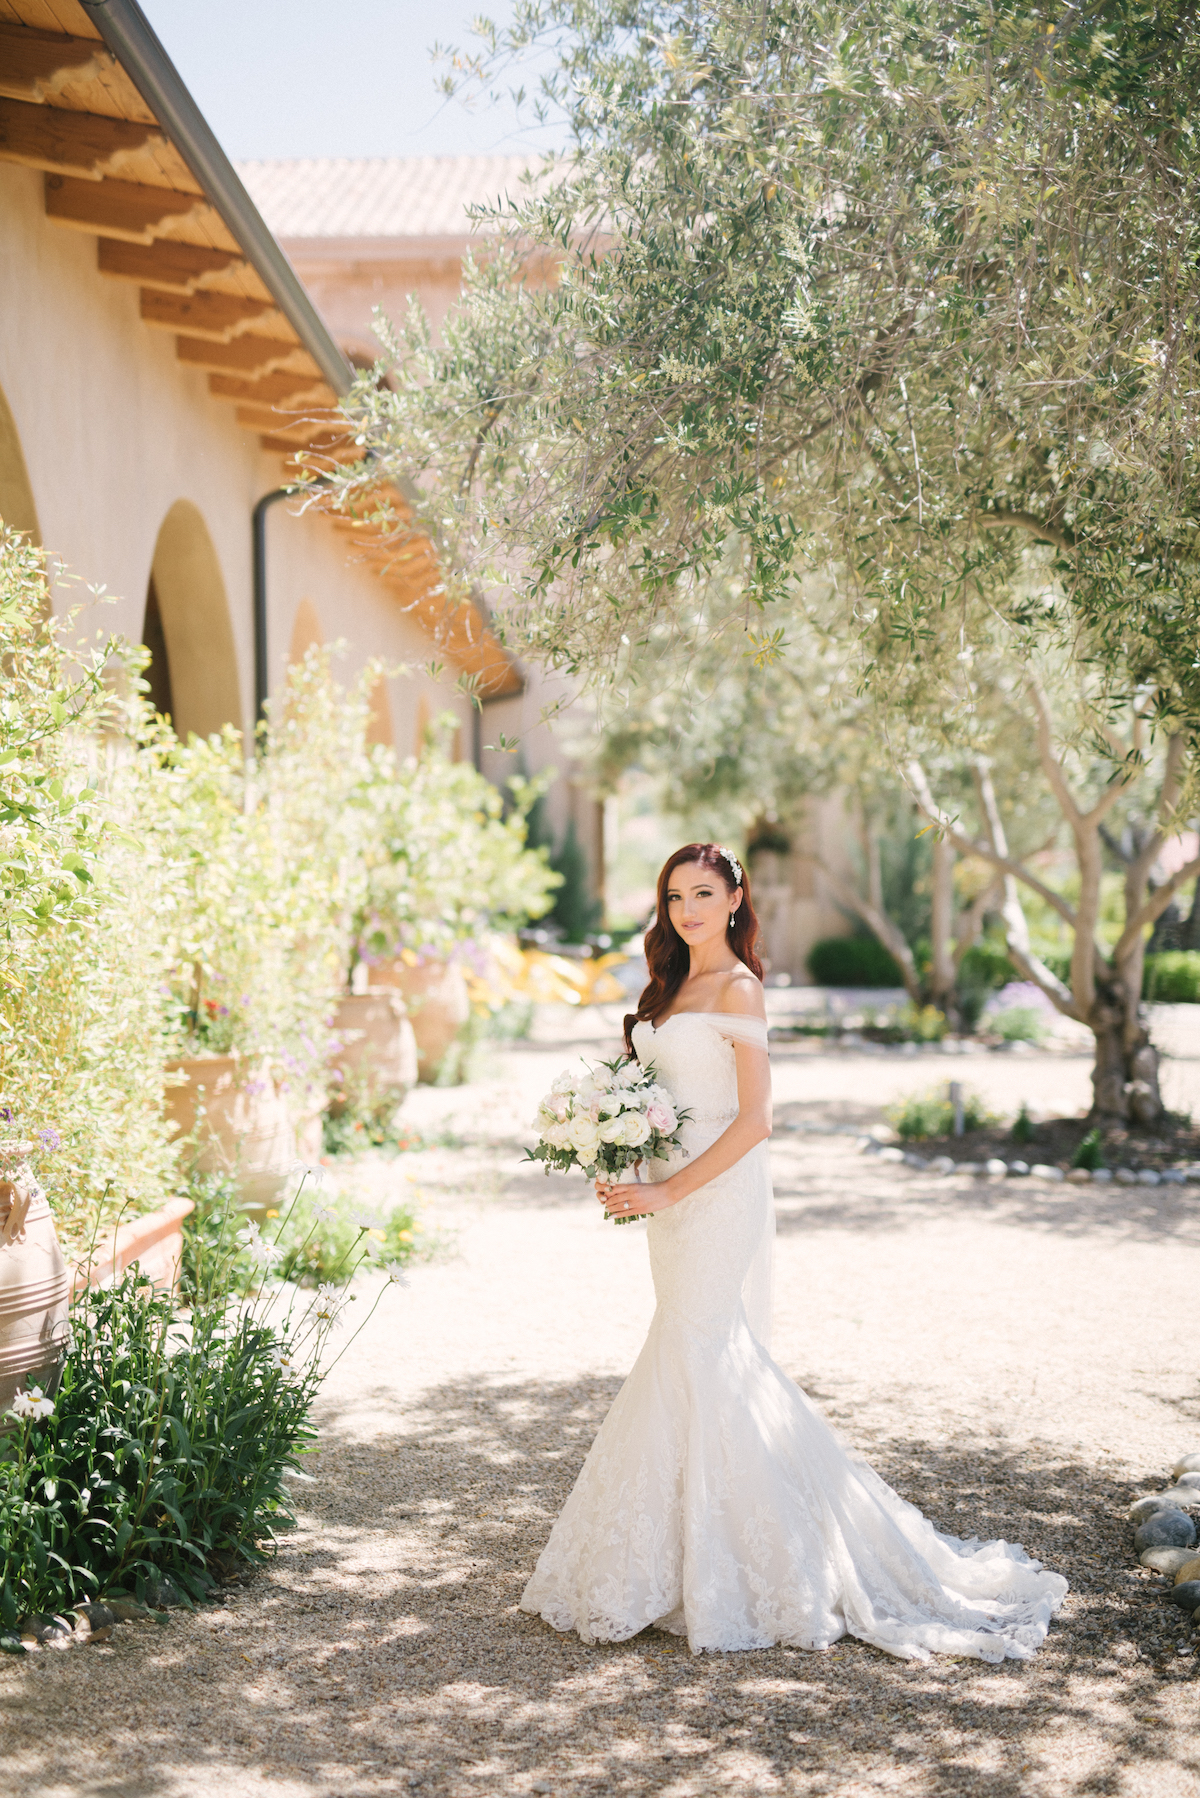 Tuscan style Allegretto Vineyard and Resort with elegant bride